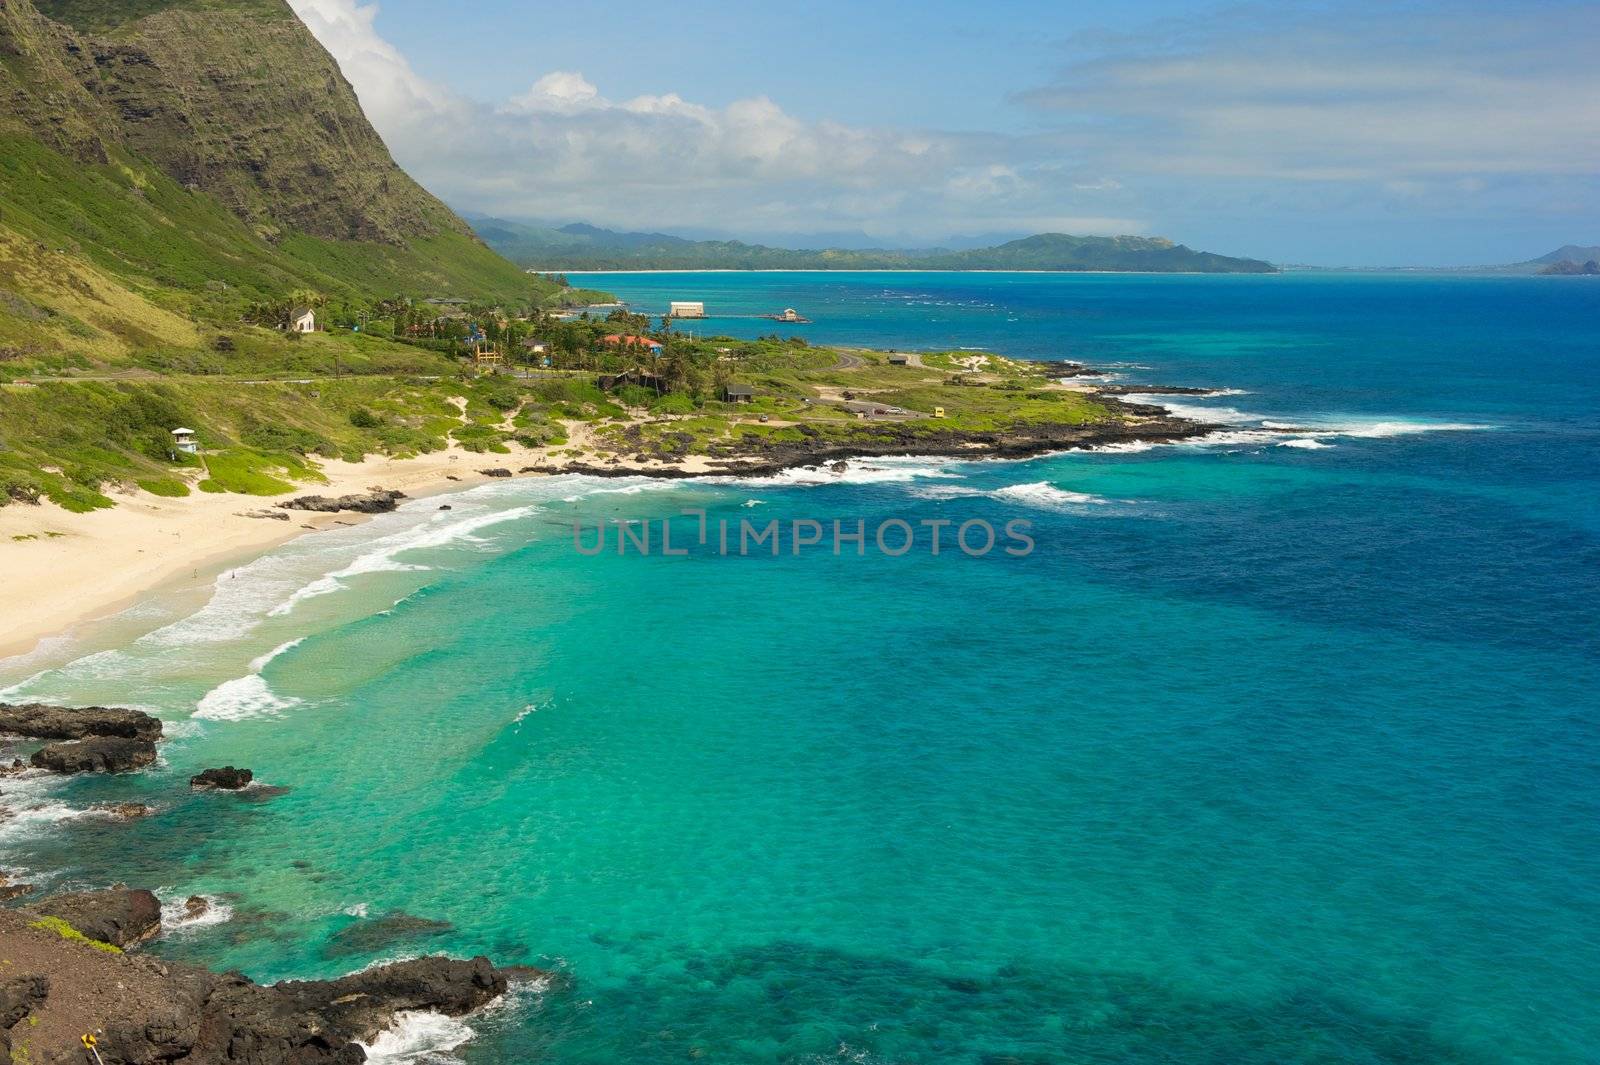 A small town on the Hawaiian island of Oahu with blue sky and clear water